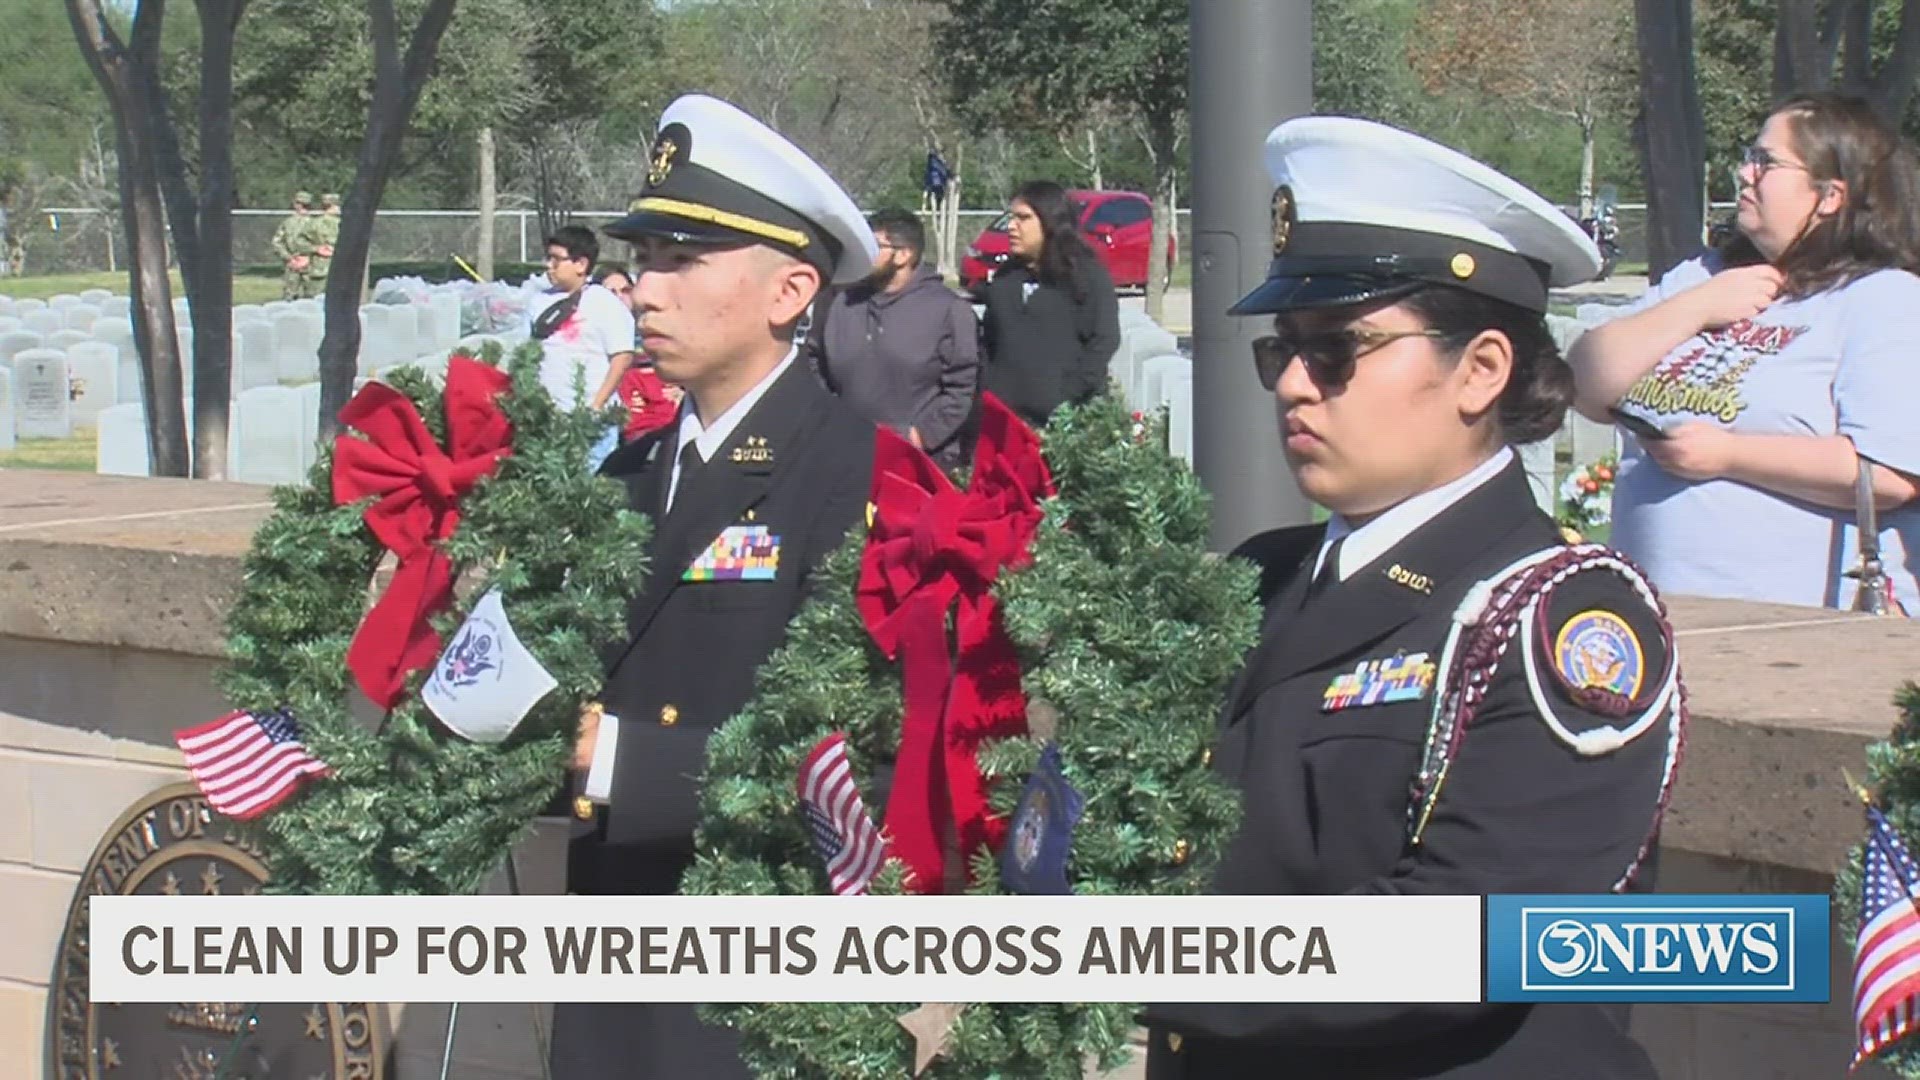 The call for volunteers to help pick up and put away wreaths at the Coastal Bend State Veterans Cemetery has been rescheduled due to expected inclement weather.